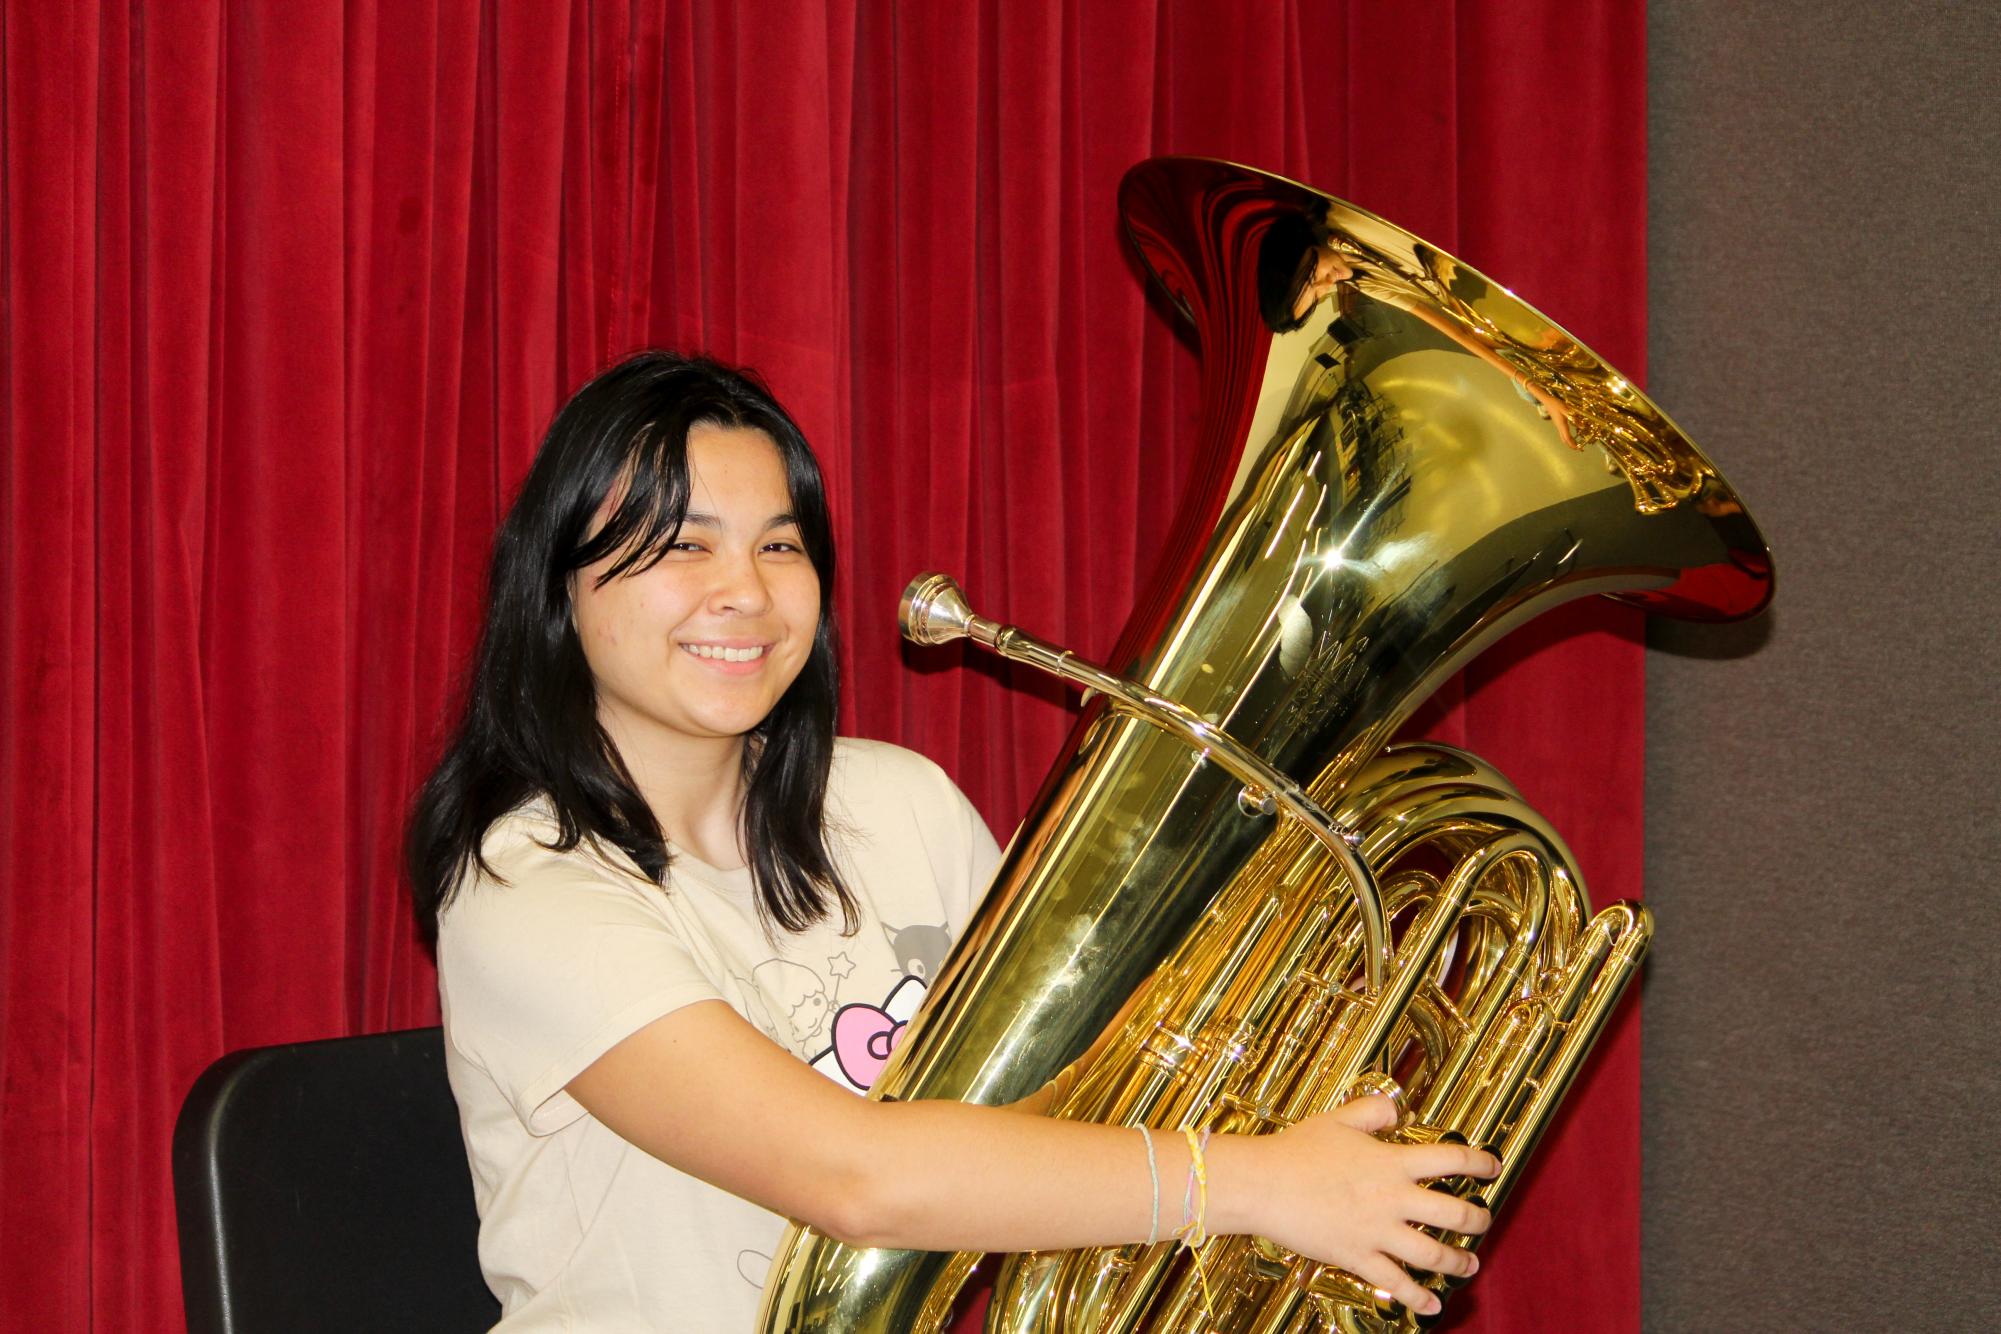 Poi Borchardt 26 plays the double B flat tuba, which is the most common model in concert bands